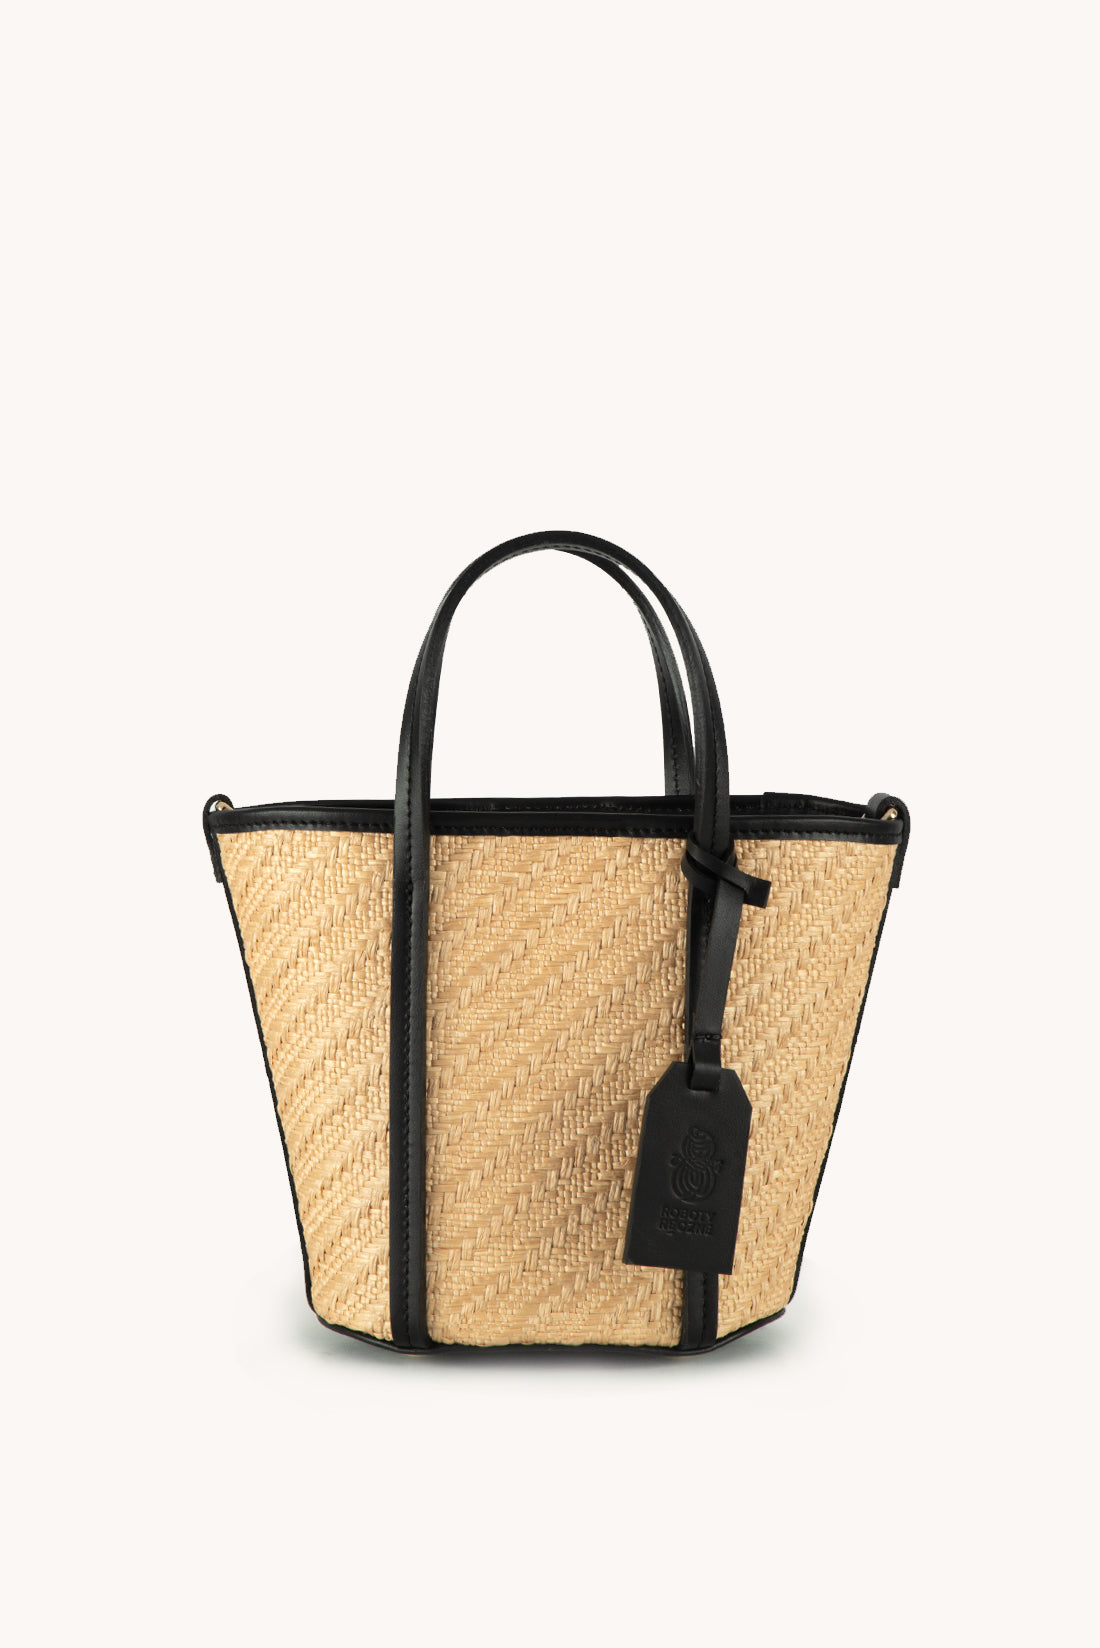 Isabelle leather basket - Limited Edition